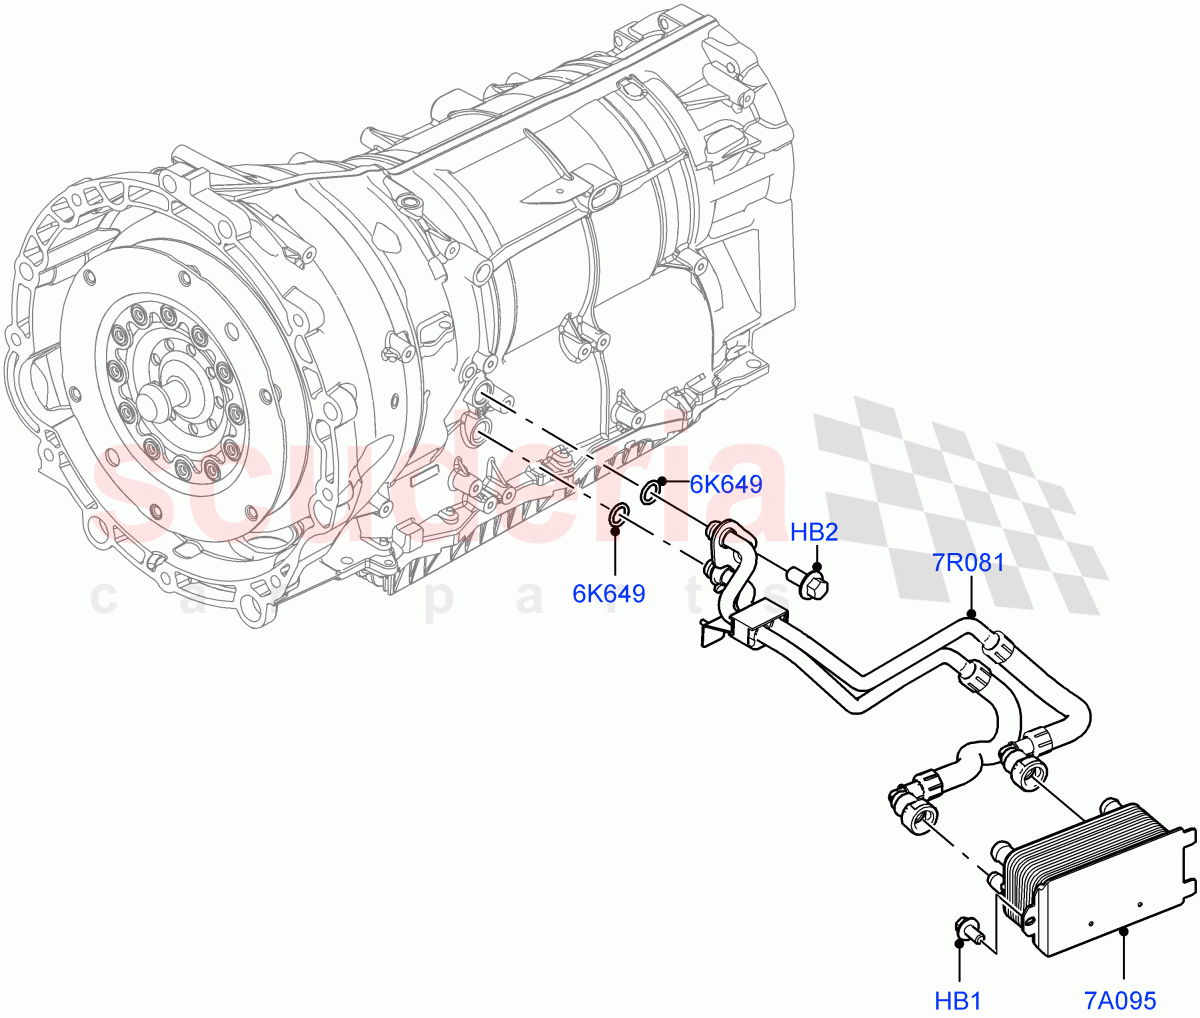 Transmission Cooling Systems(3.0L AJ20P6 Petrol High,8 Speed Auto Trans ZF 8HP76,3.0L AJ20D6 Diesel High)((V)FROMKA000001) of Land Rover Land Rover Range Rover (2012-2021) [5.0 OHC SGDI NA V8 Petrol]